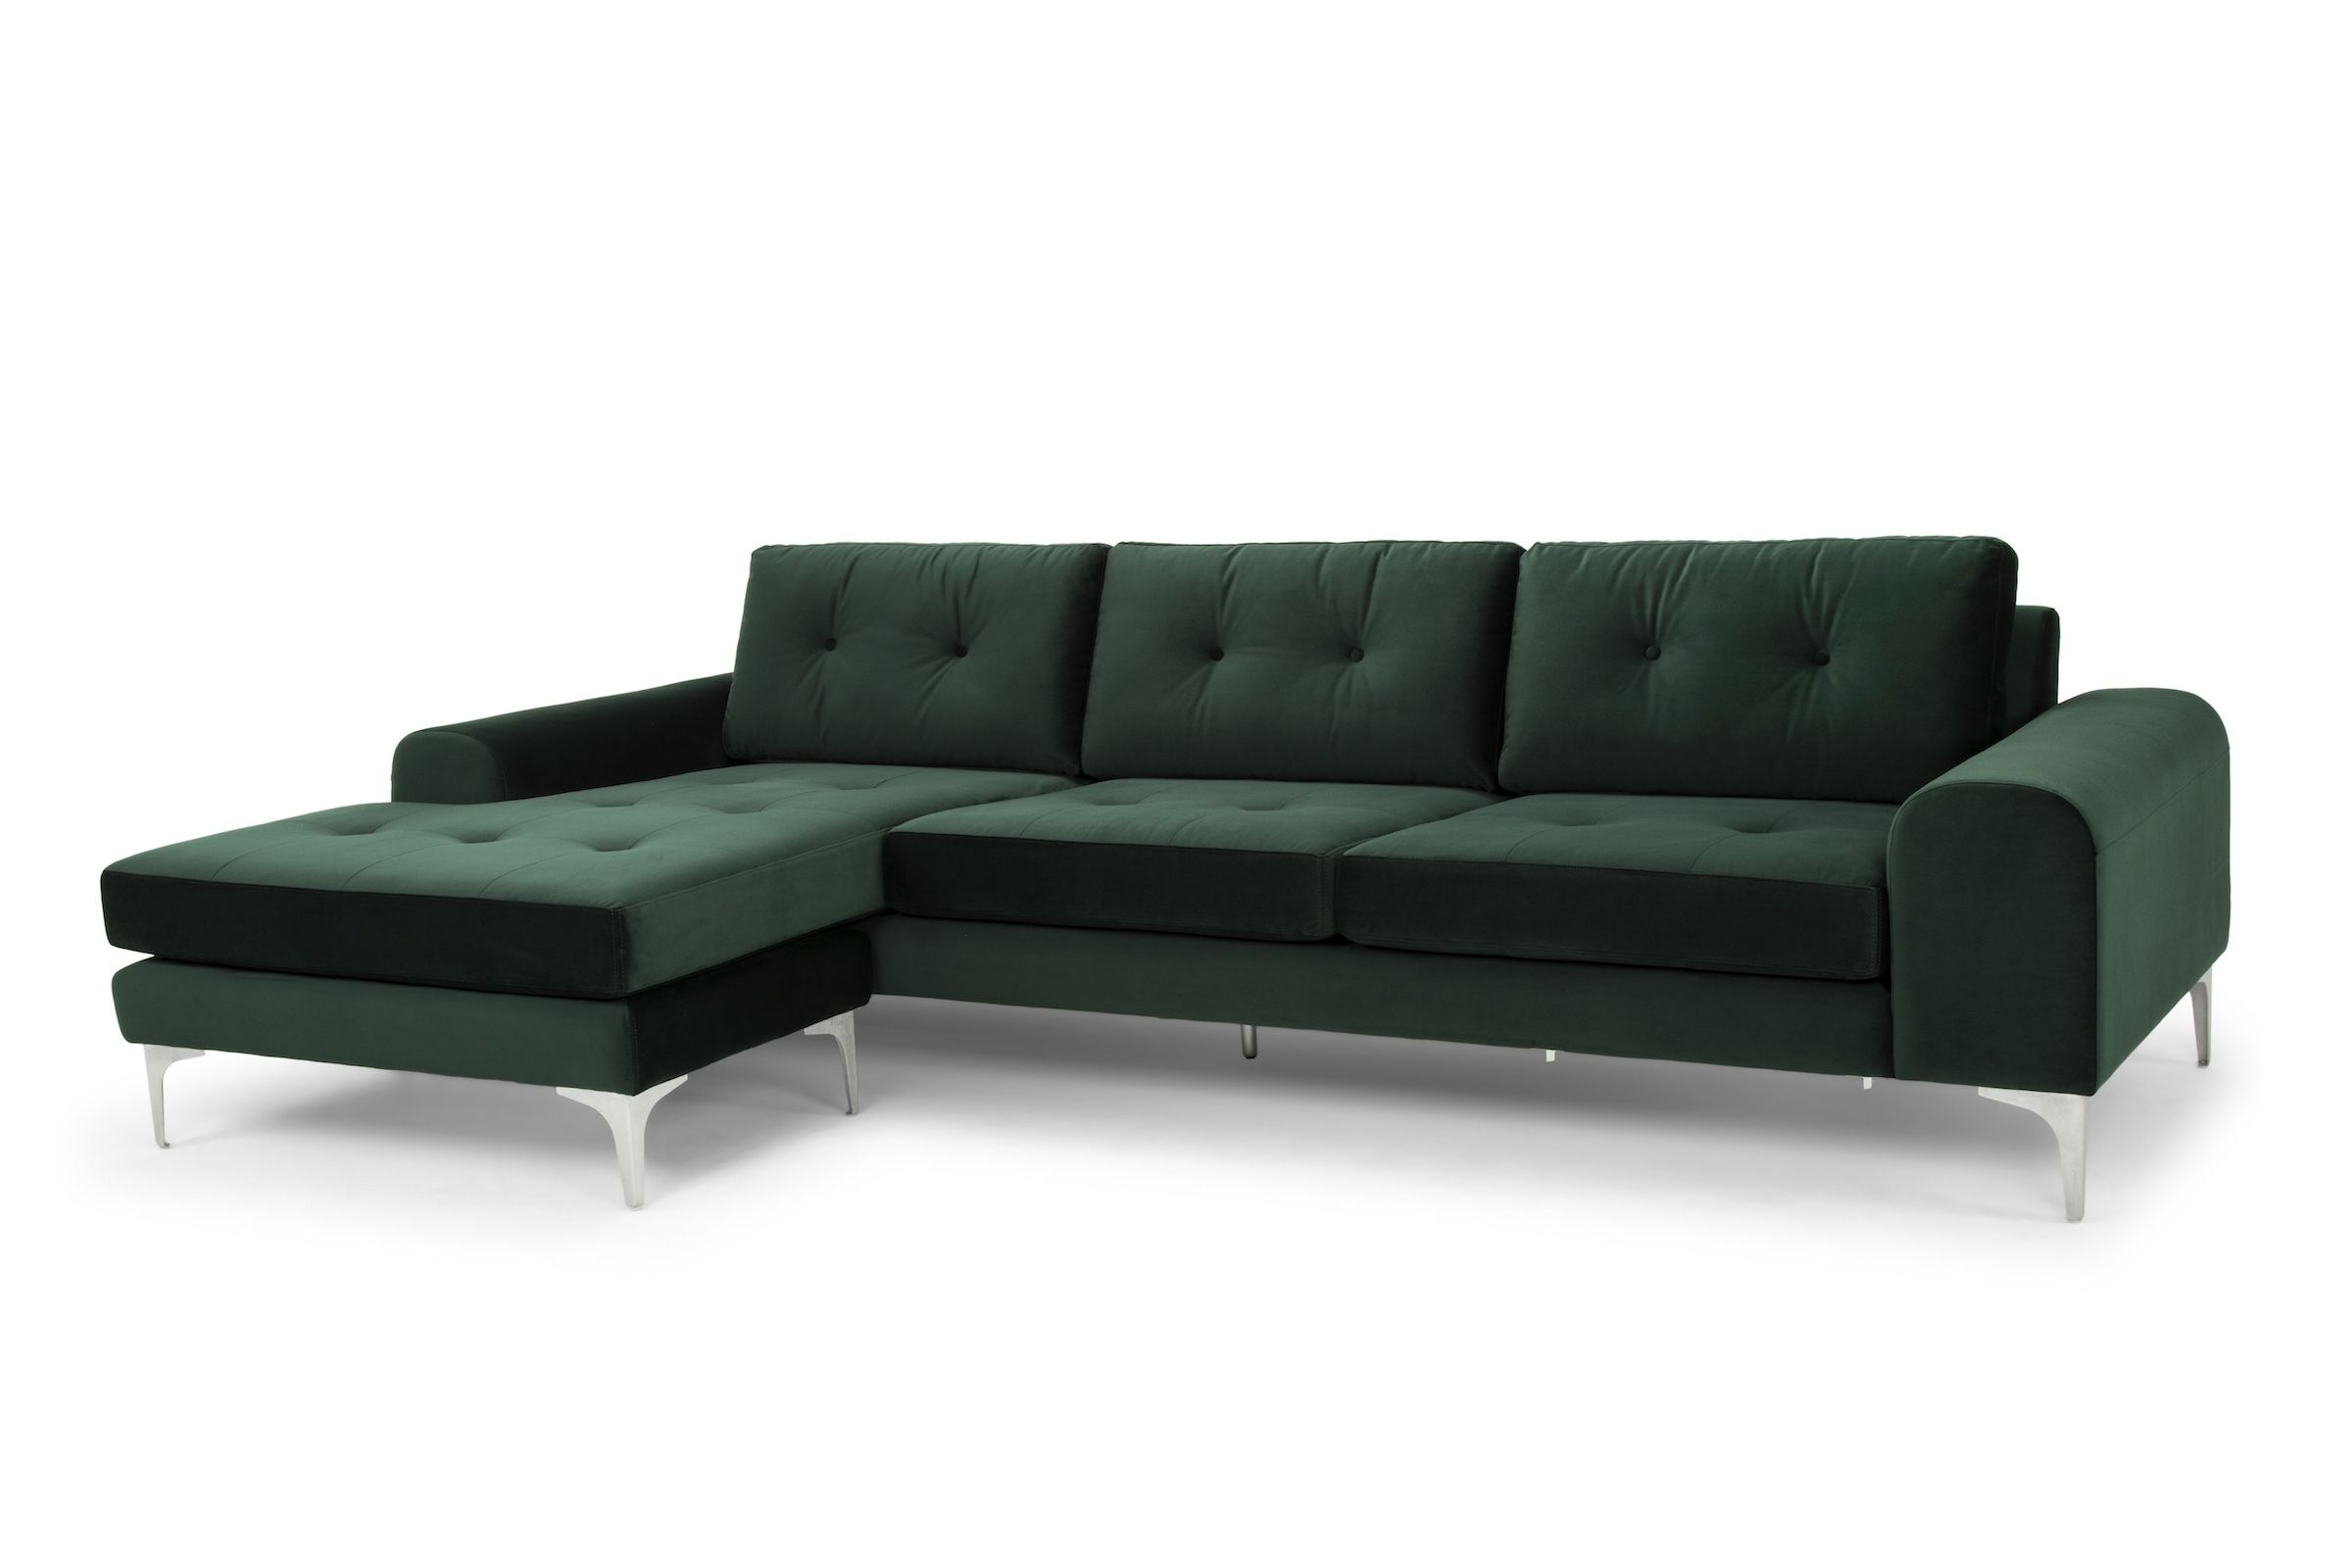 Sectional Sofa In Emerald Green And Brushed Stainless – Reversible Pertaining To Visalia Ca Sectional Sofas (View 3 of 10)